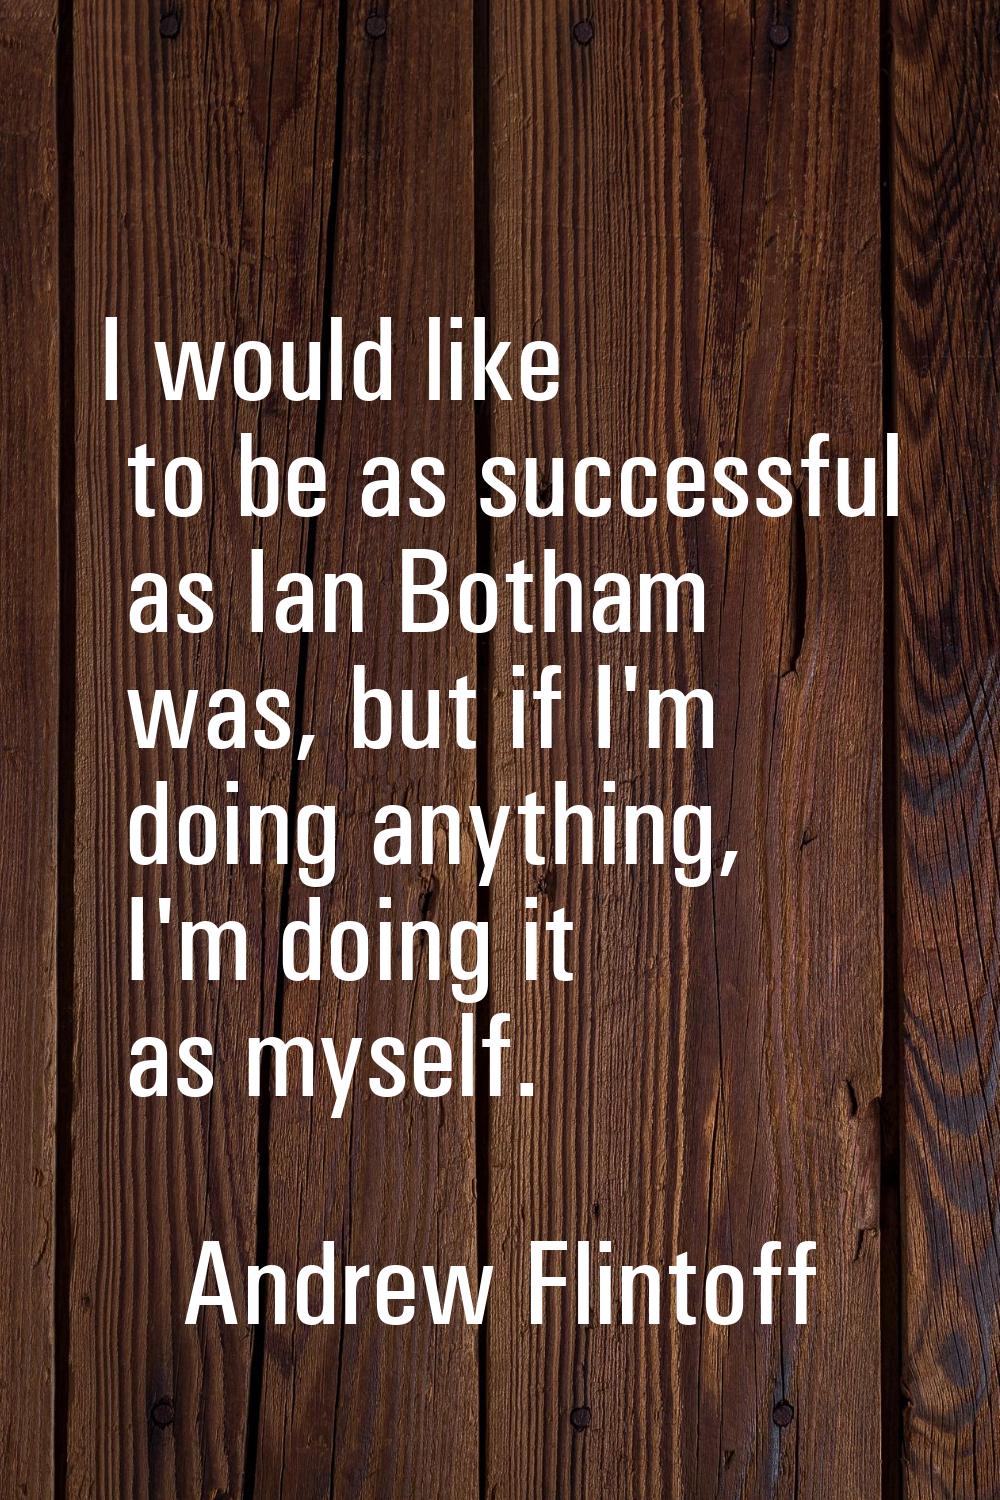 I would like to be as successful as Ian Botham was, but if I'm doing anything, I'm doing it as myse